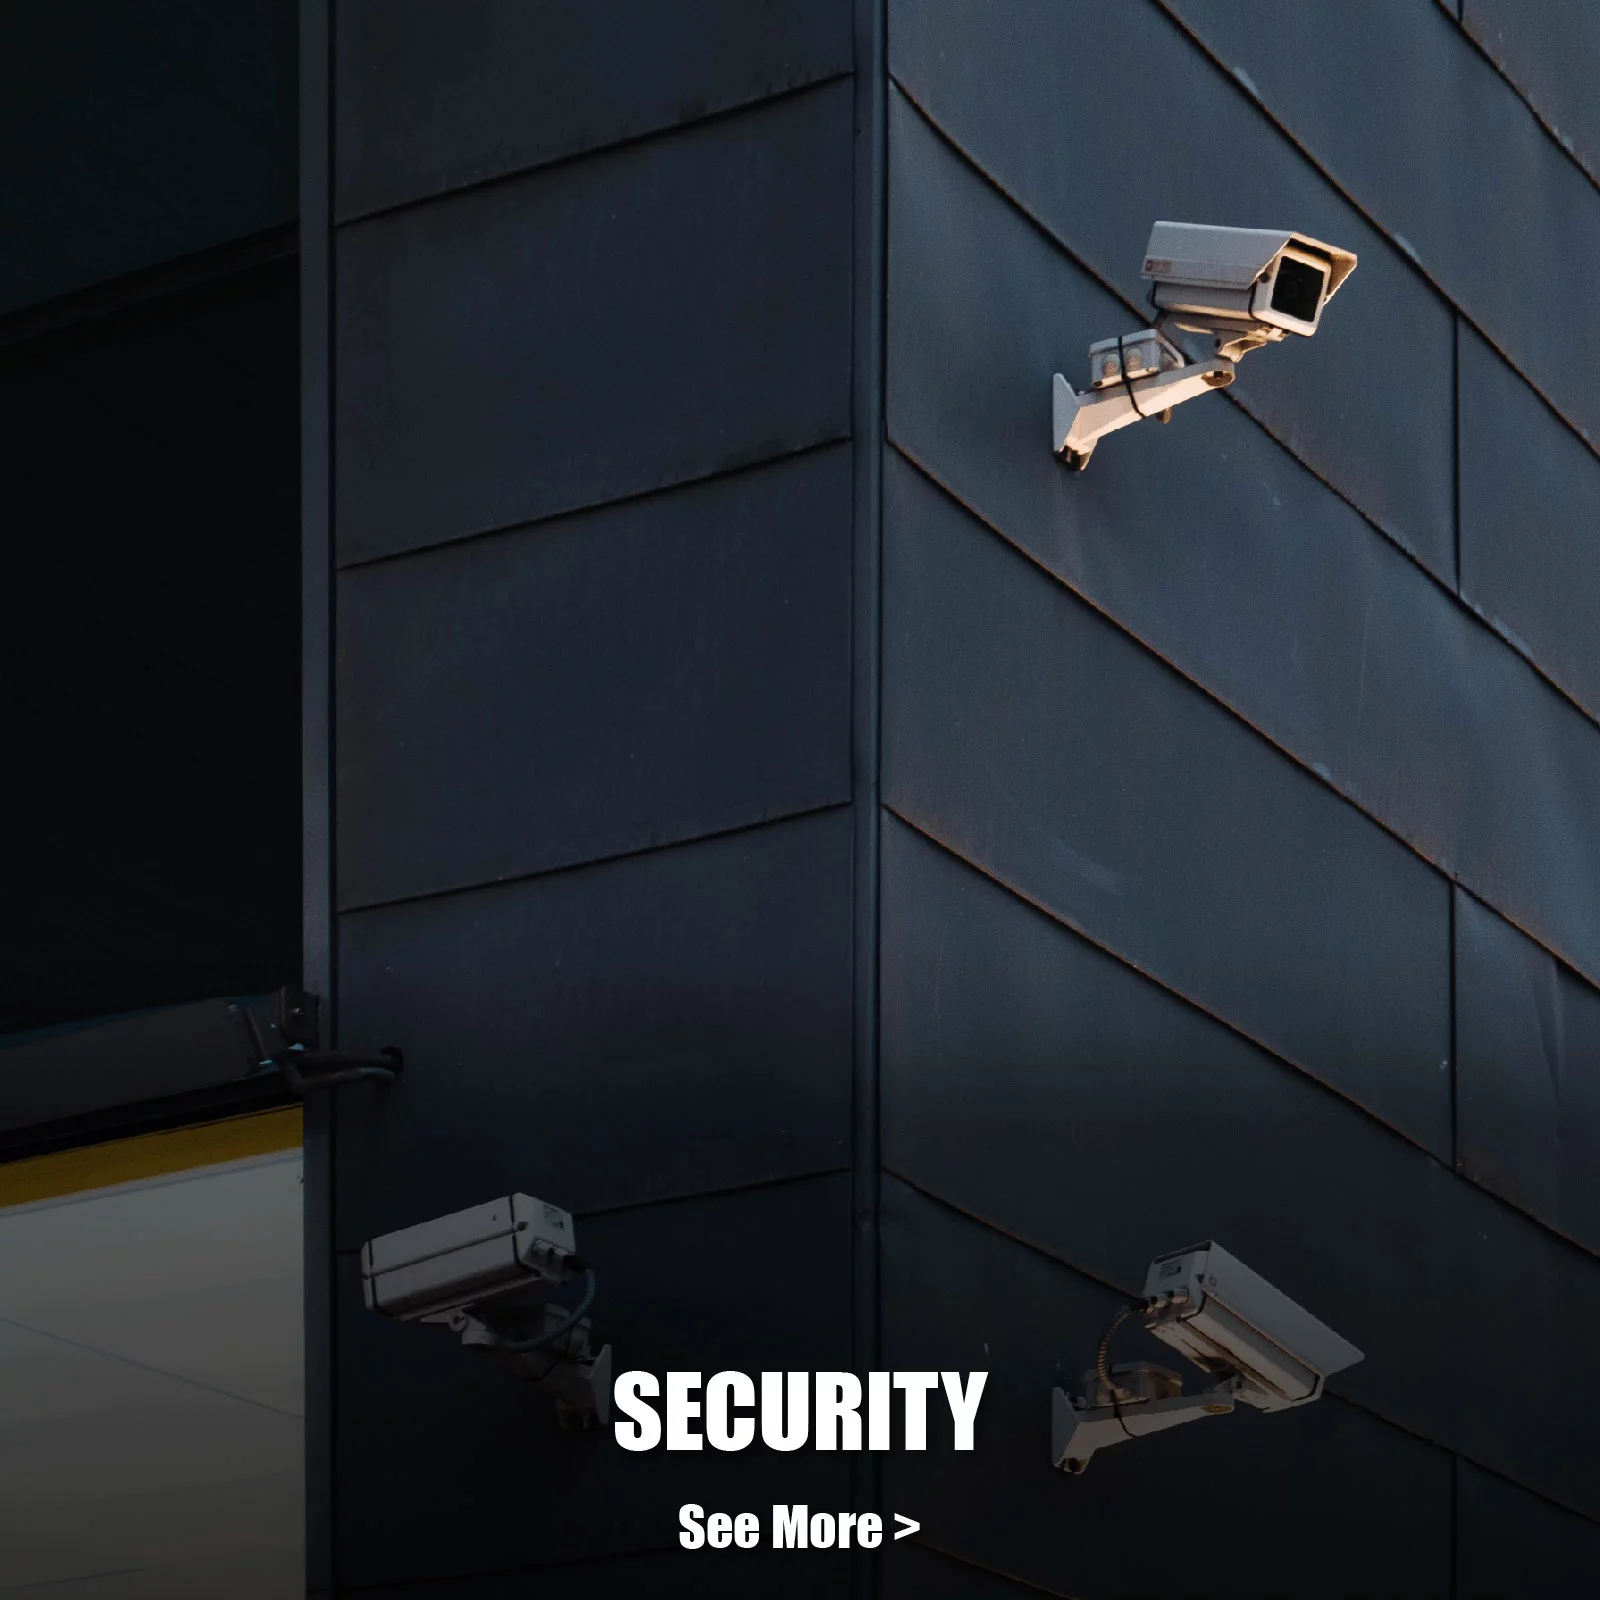 Security Image V2 - Our Businesses Section - Homepage